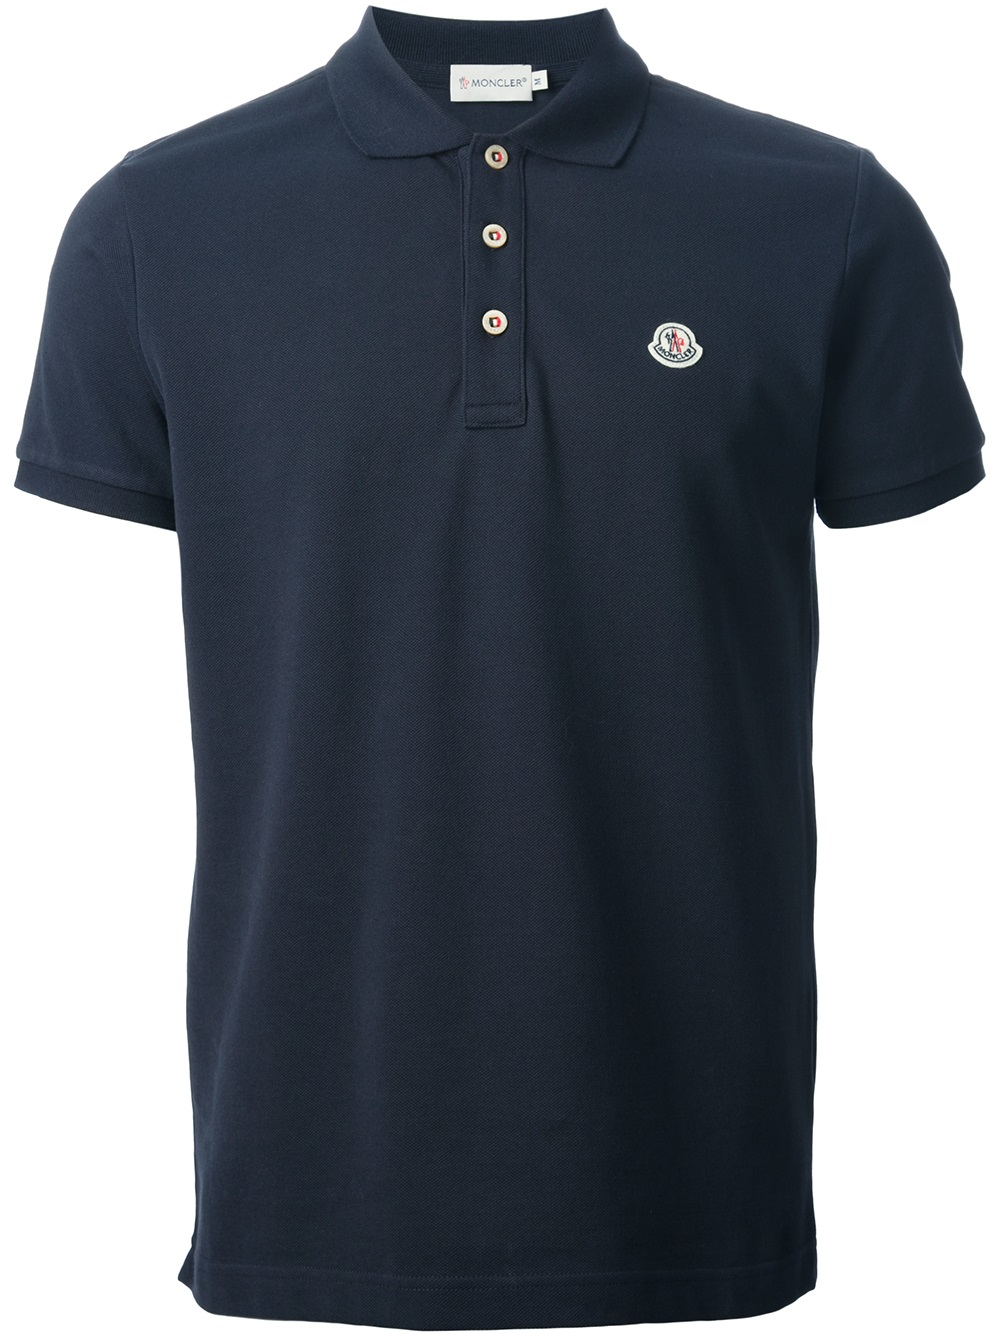 Lyst - Moncler Polo Shirt in Blue for Men